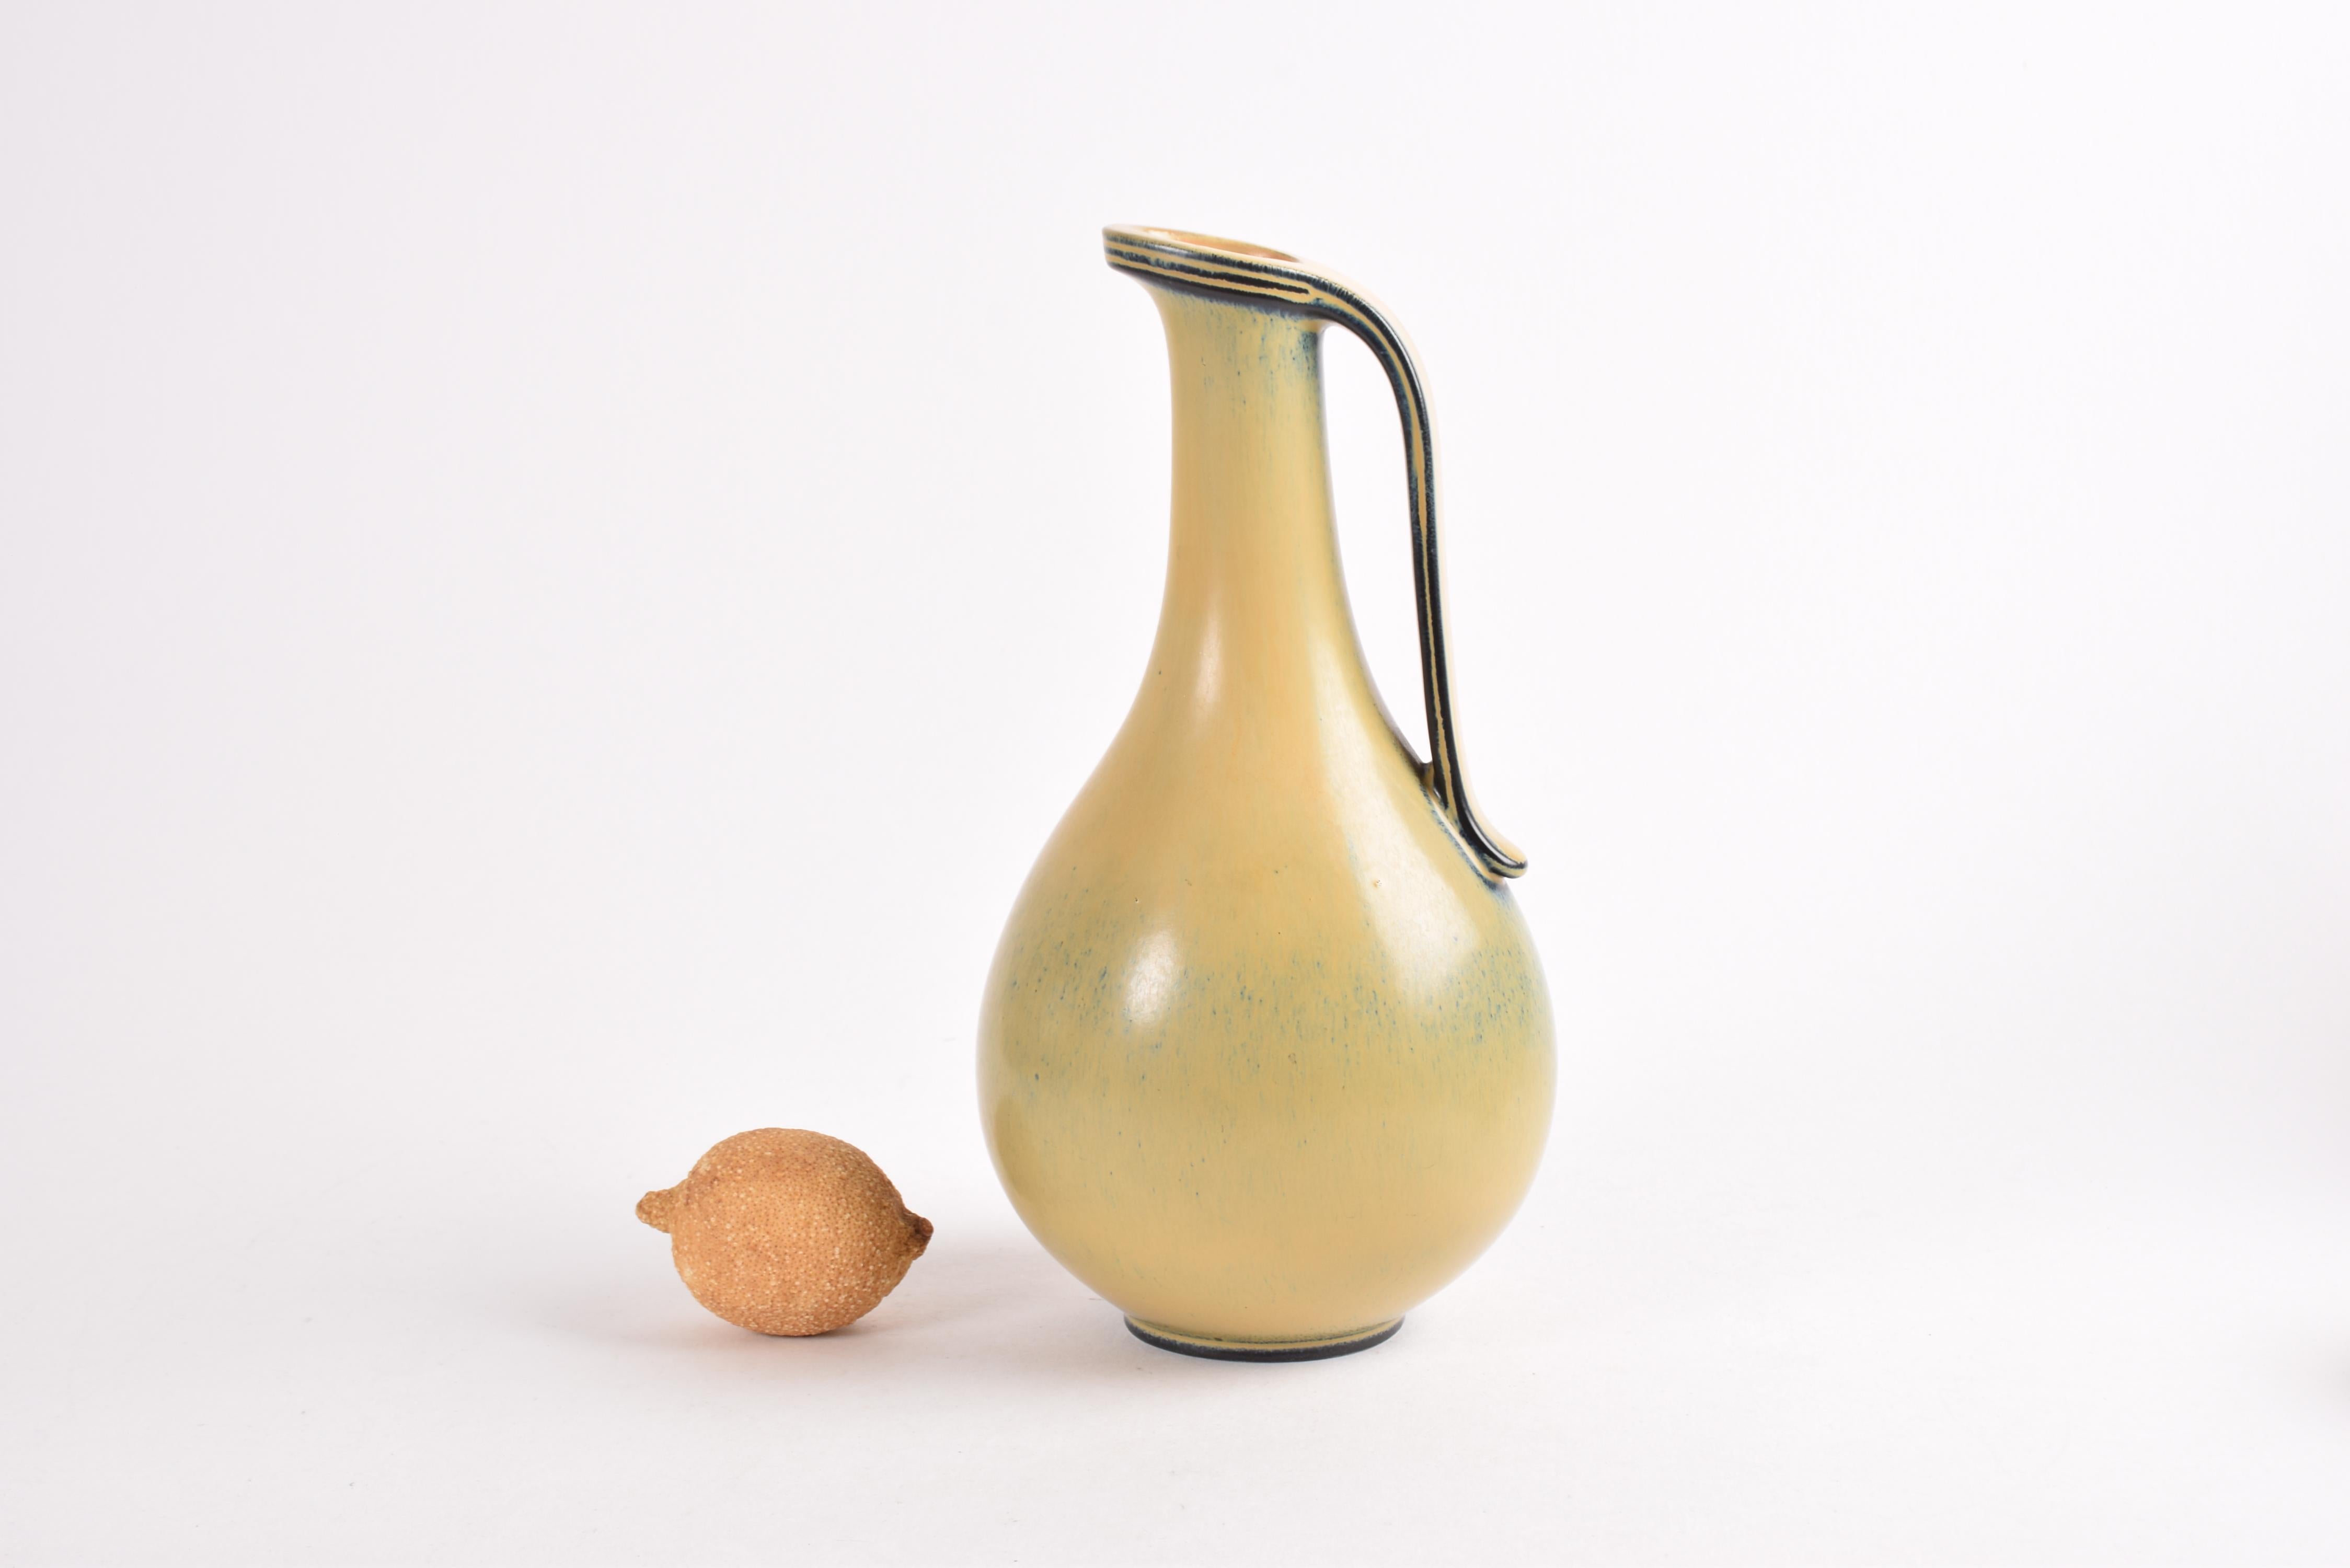 An elegant handled vase by Swedish designer Gunnar Nylund (1904-97) for Rörstrand, Sweden. Made ca 1940s to 50s.

The vase is made from stoneware and it comes in a rare version with yellow glaze with blue elements. The curves are accentuated by